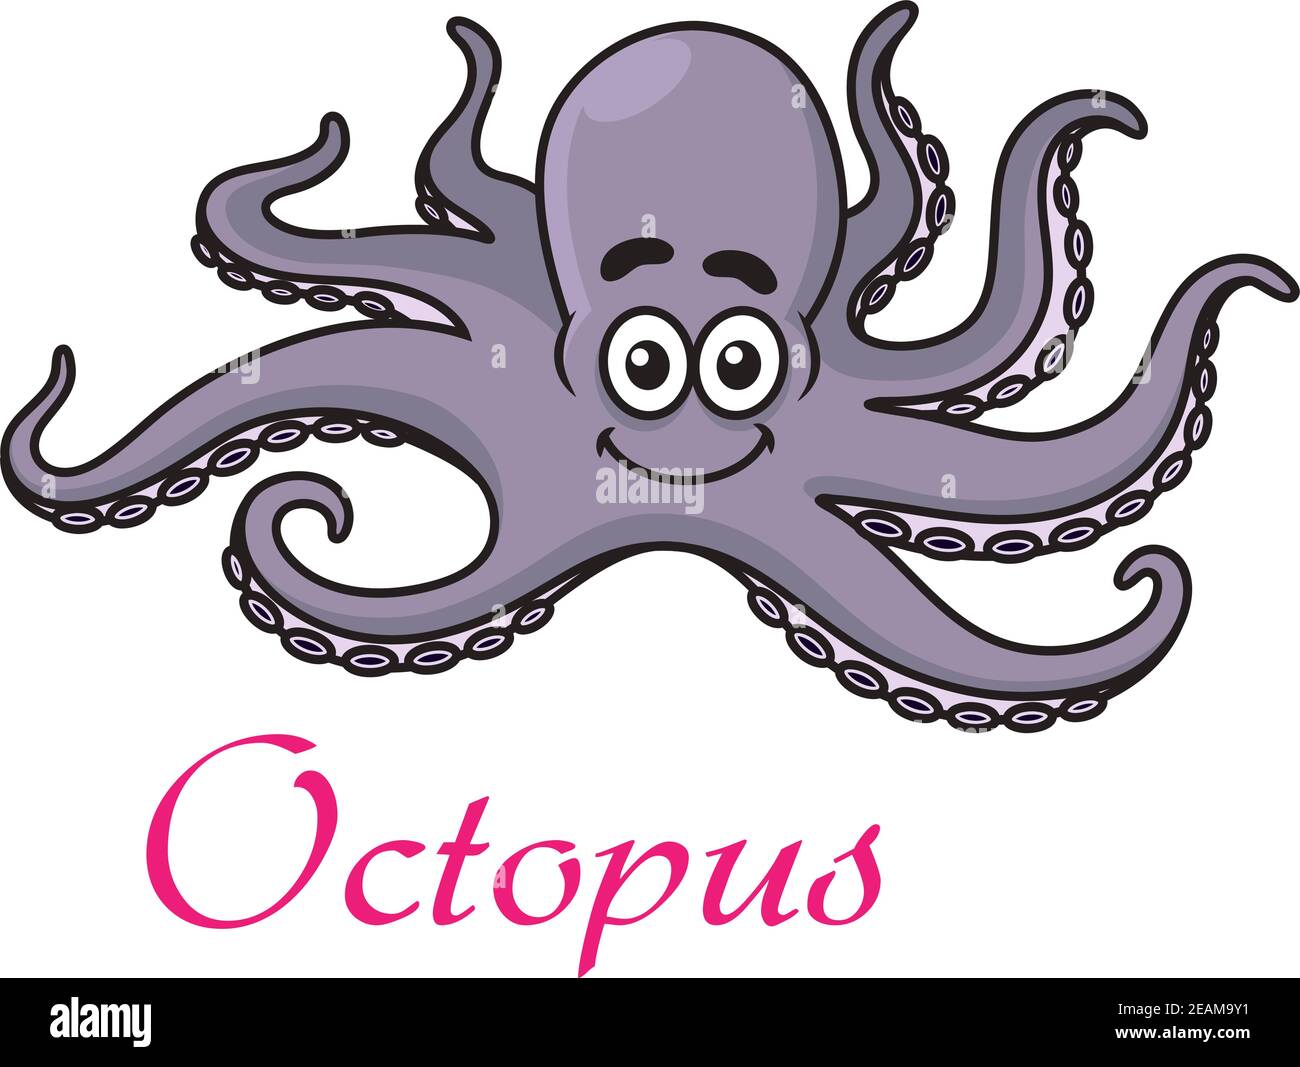 Cute cartoon octopus with a happy smiling face and waving tentacles on white with the text - Octopus - below Stock Vector